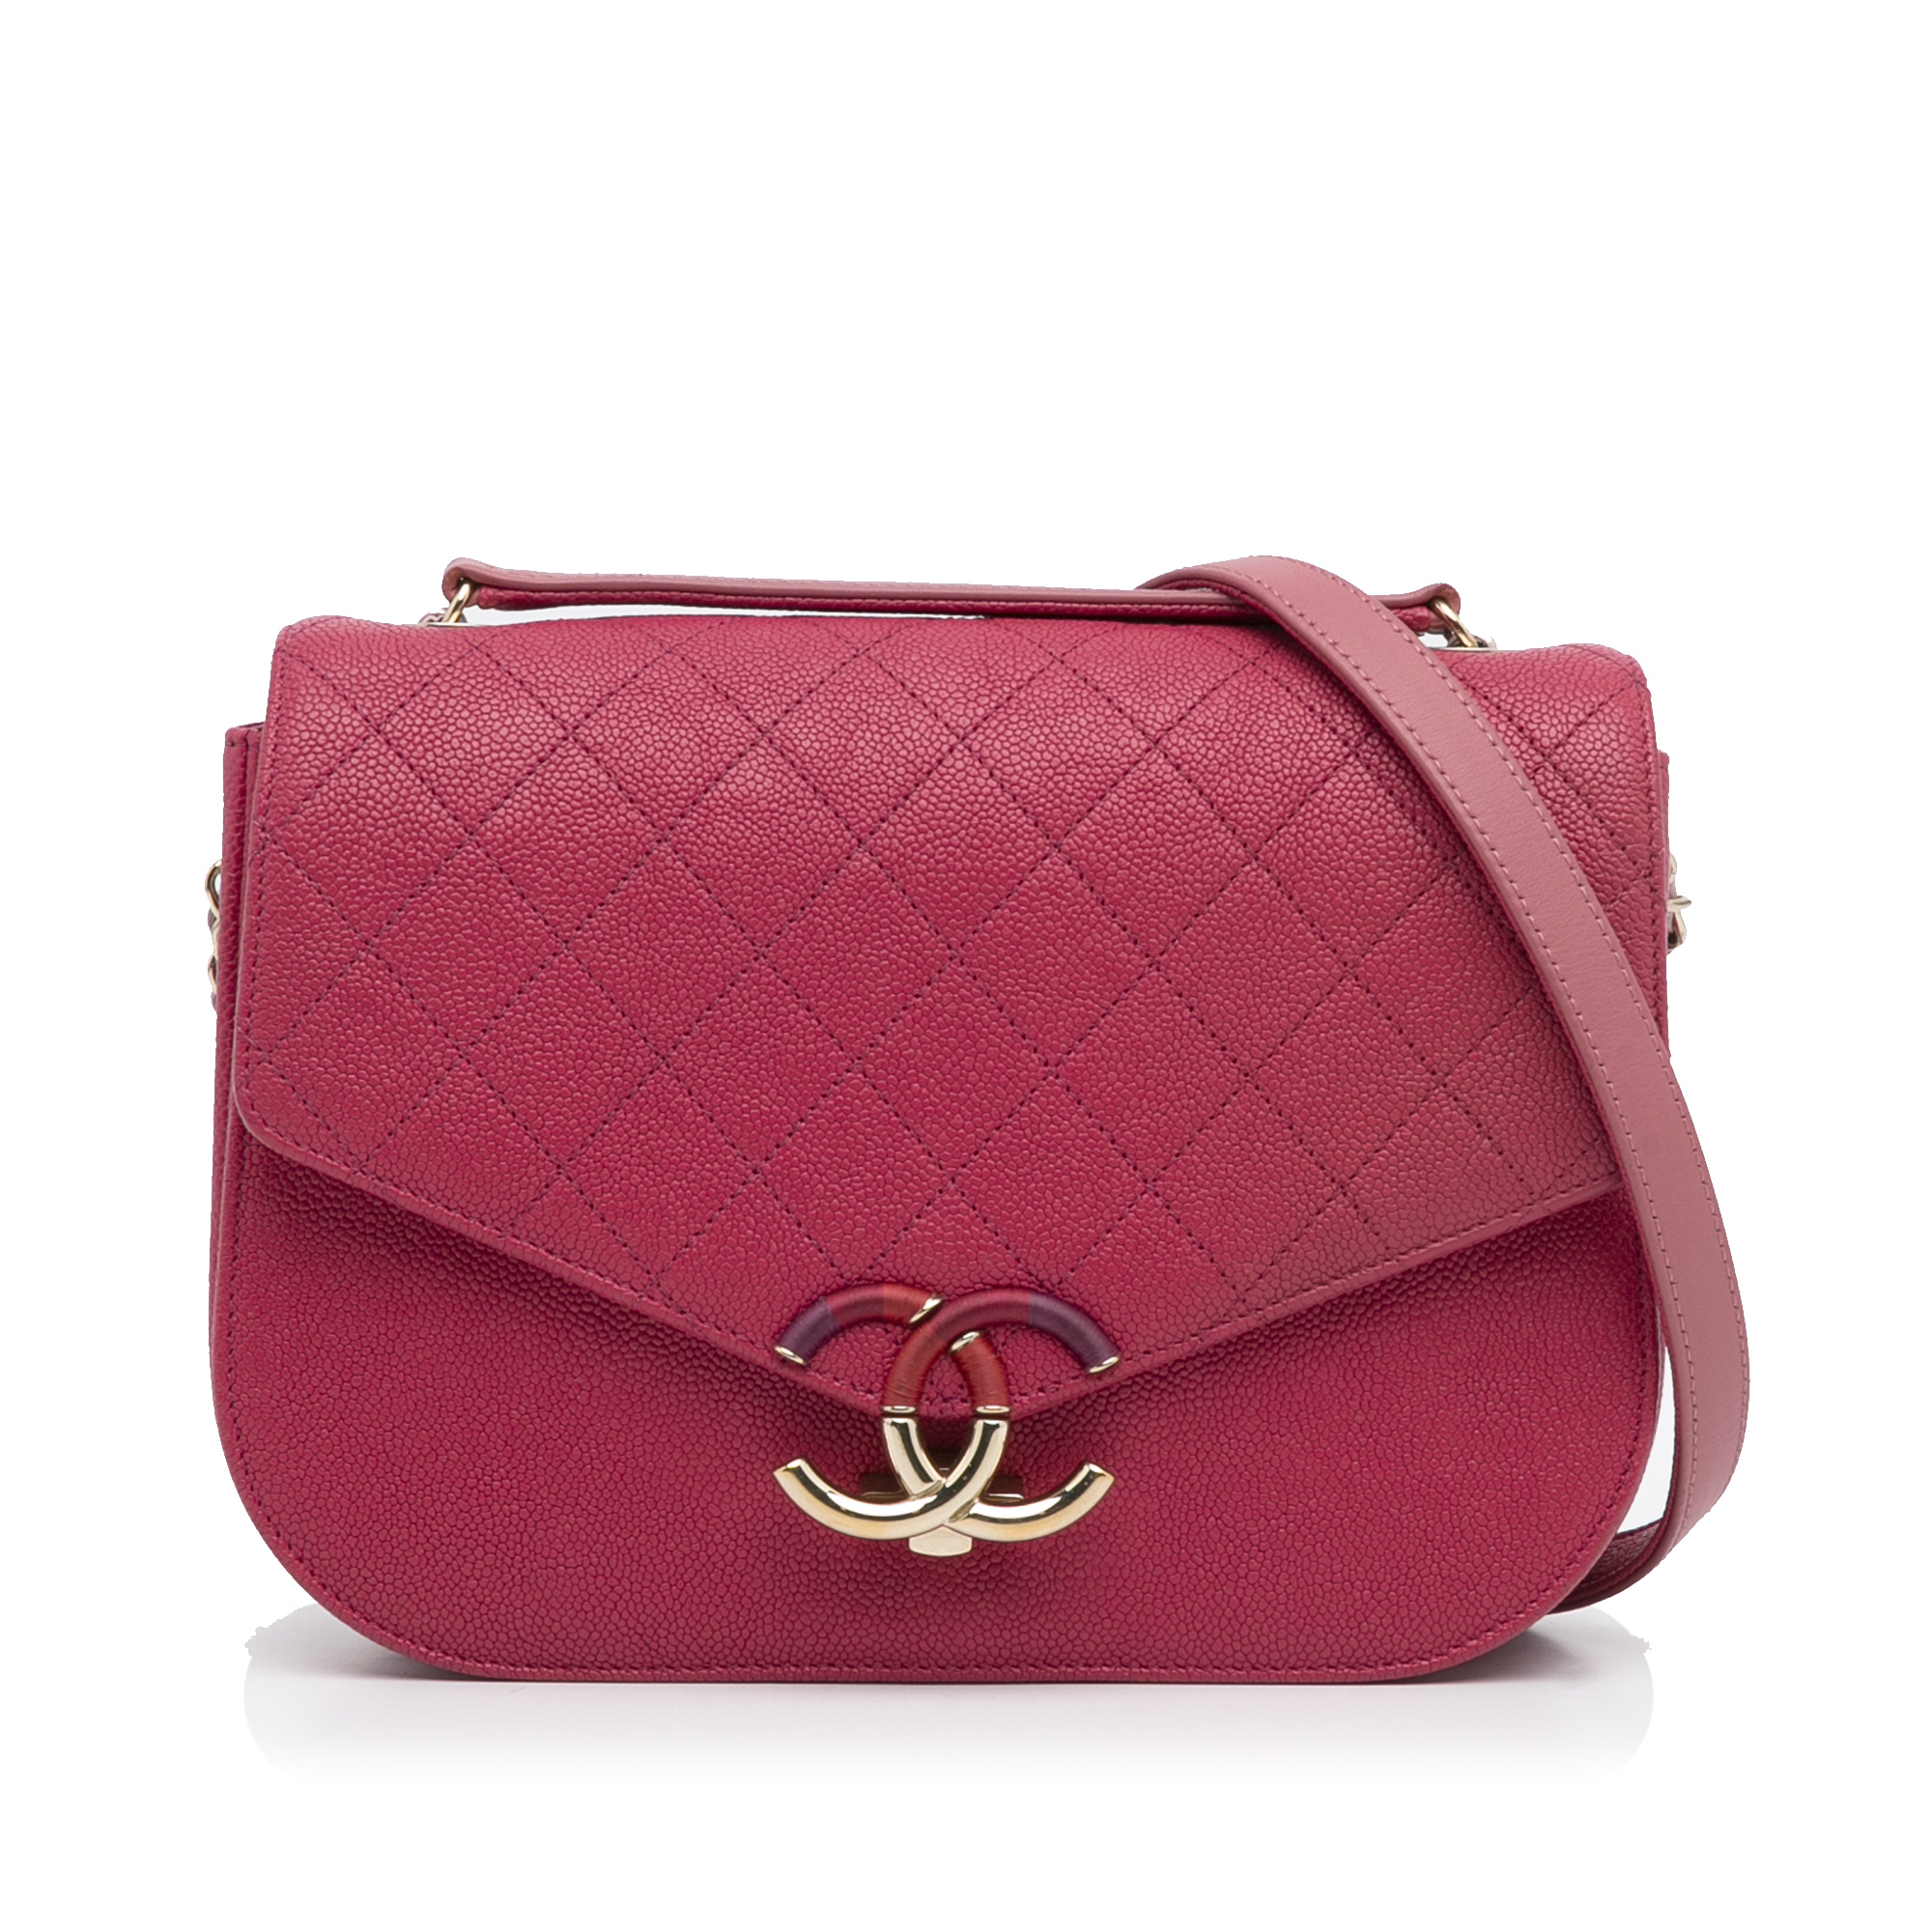 Quilted Leather Satchel with Metal Closure